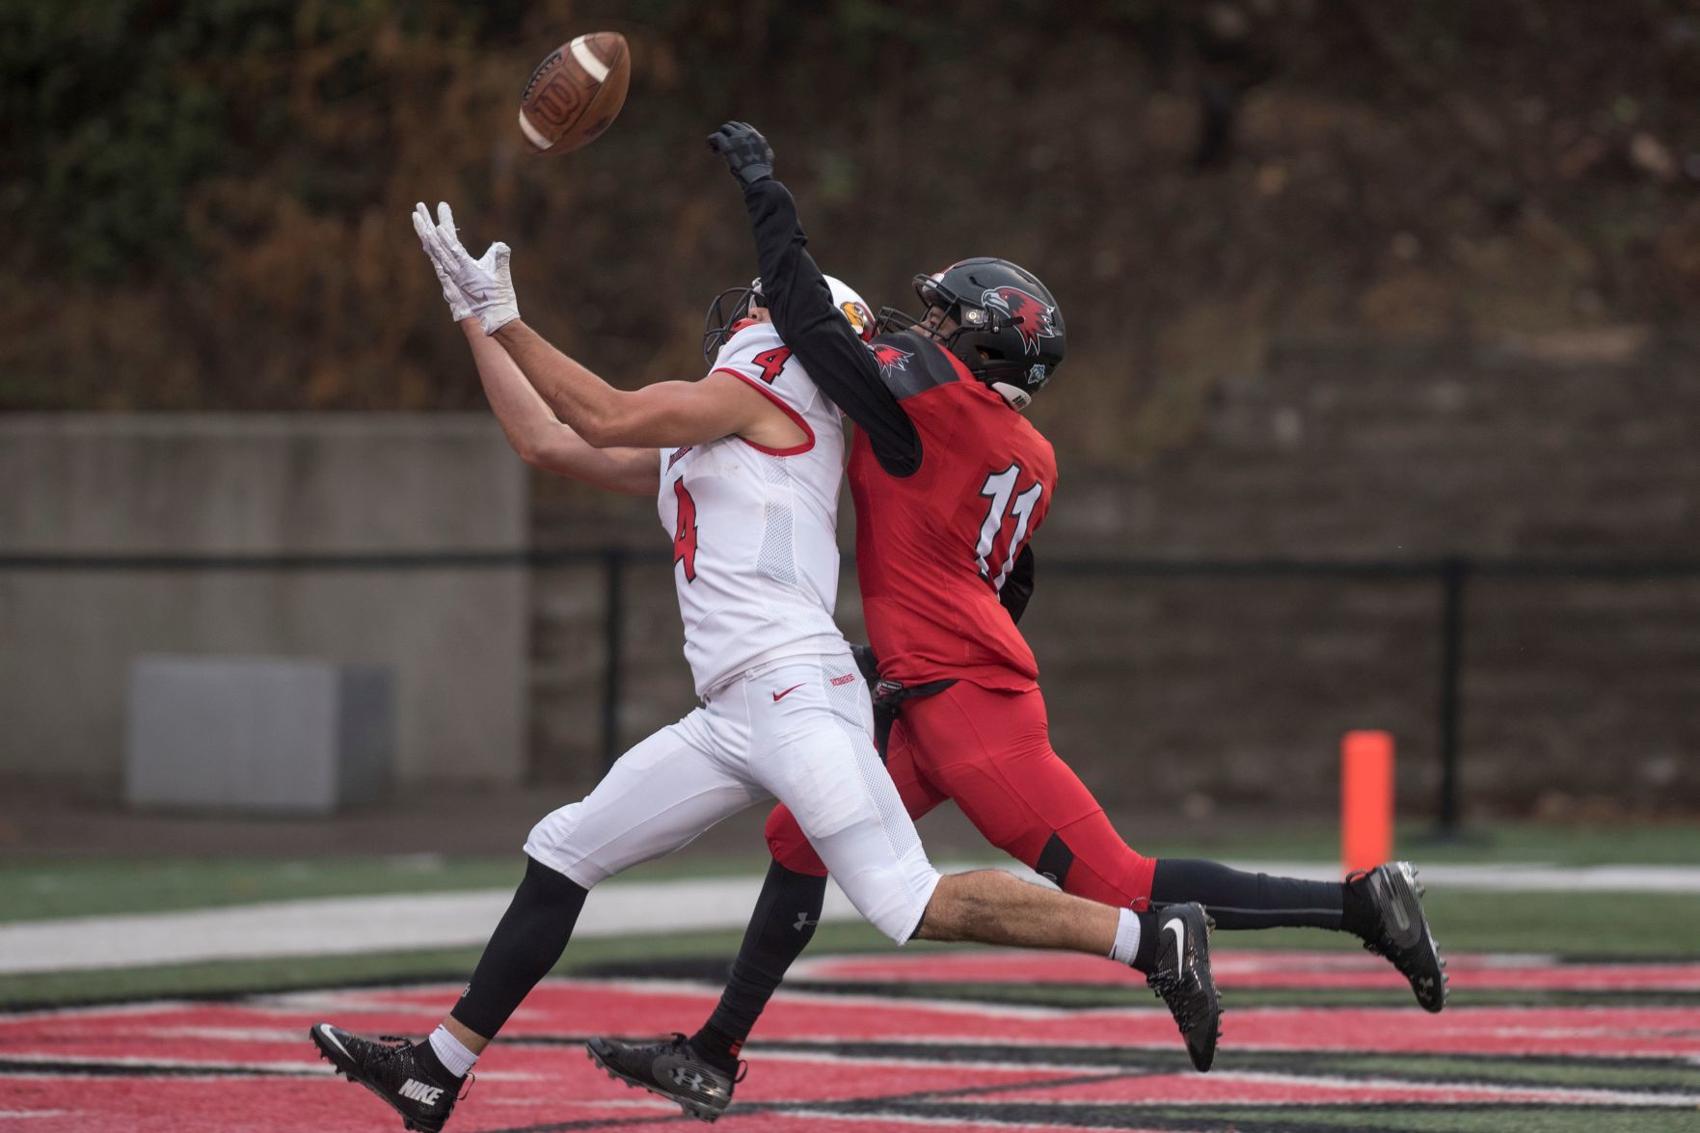 Illinois State receiver Andrew Edgar expects to play against North Dakota State